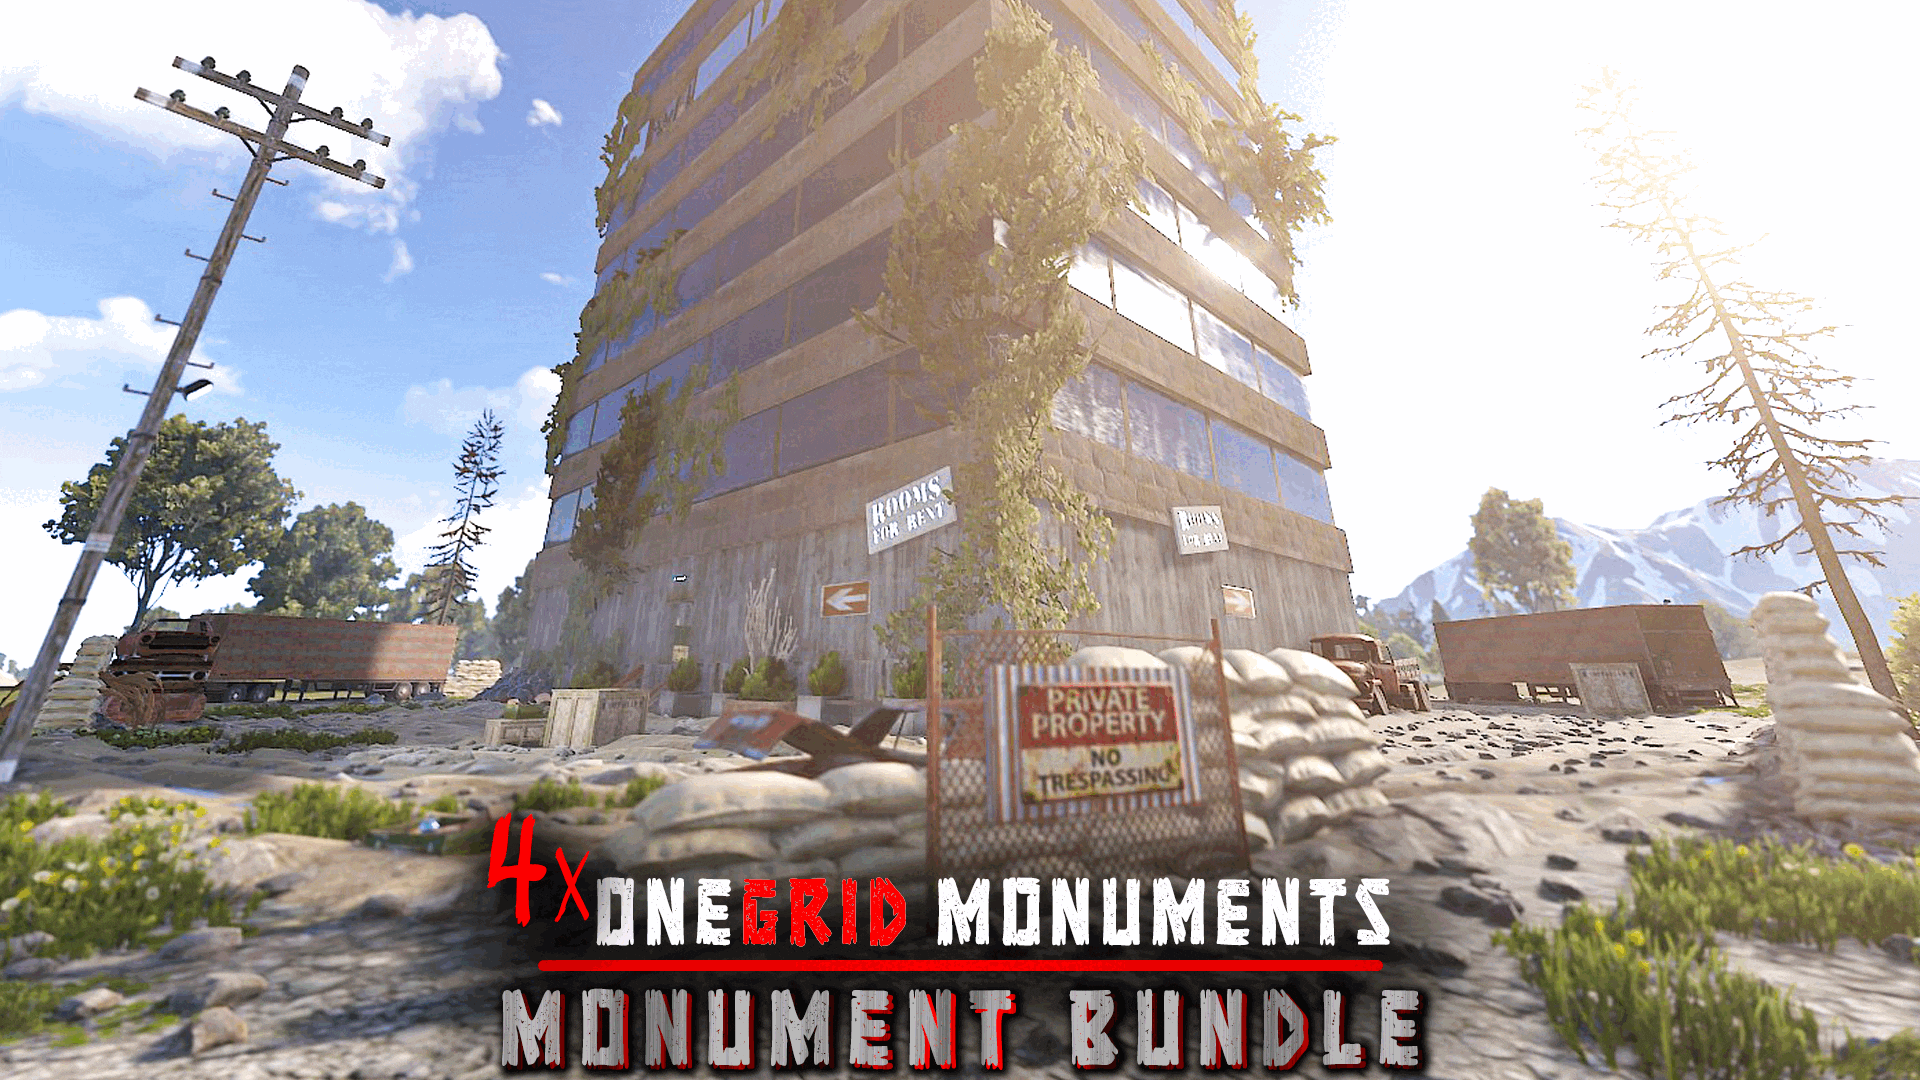 More information about "'ONE GRiD' monuments bundle (4 Pack)"